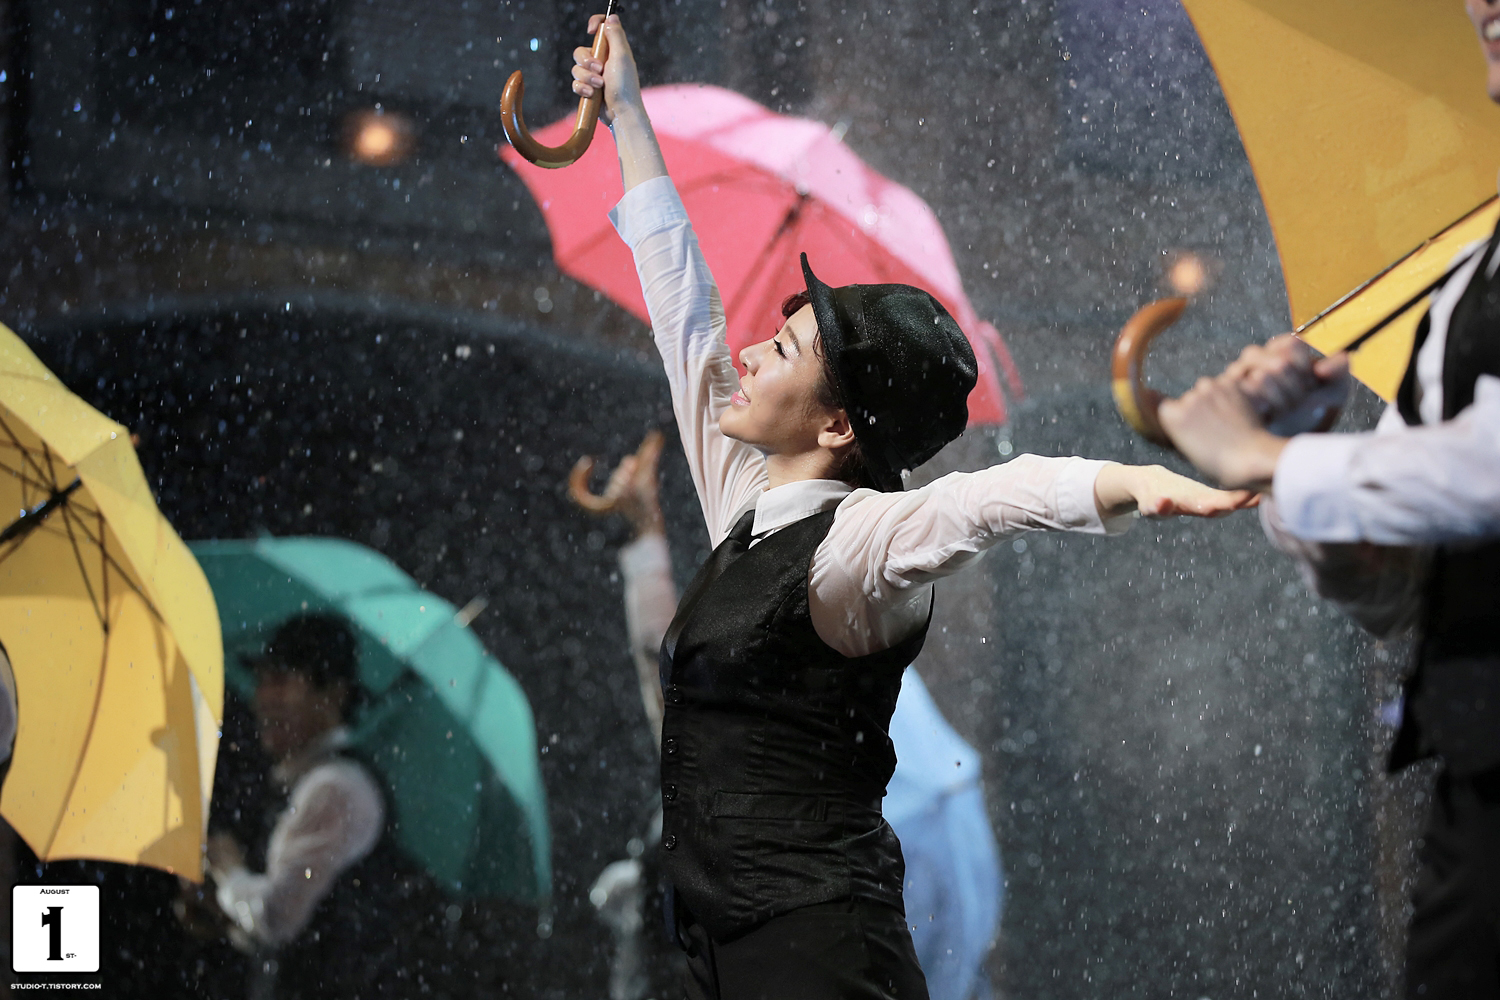 [OTHER][29-04-2014]Sunny sẽ tham gia vở nhạc kịch "SINGIN' IN THE RAIN" - Page 2 2609C63D53A169EE2CD863